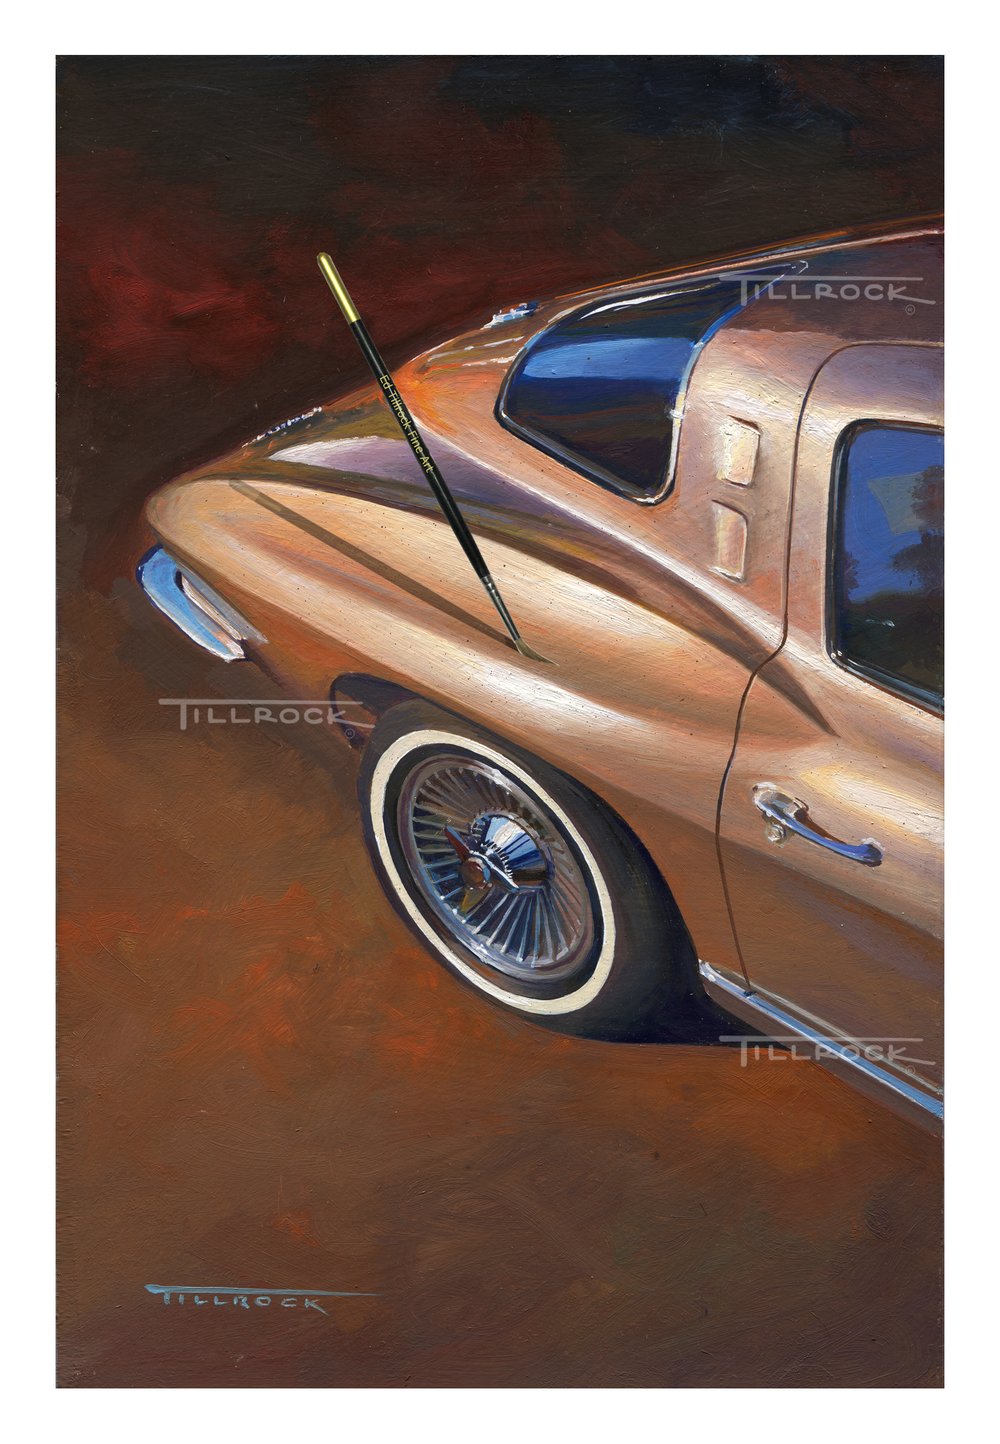 Image of "63 Corvette" 17" x 24" Signed & Numbered Giclee' Prints